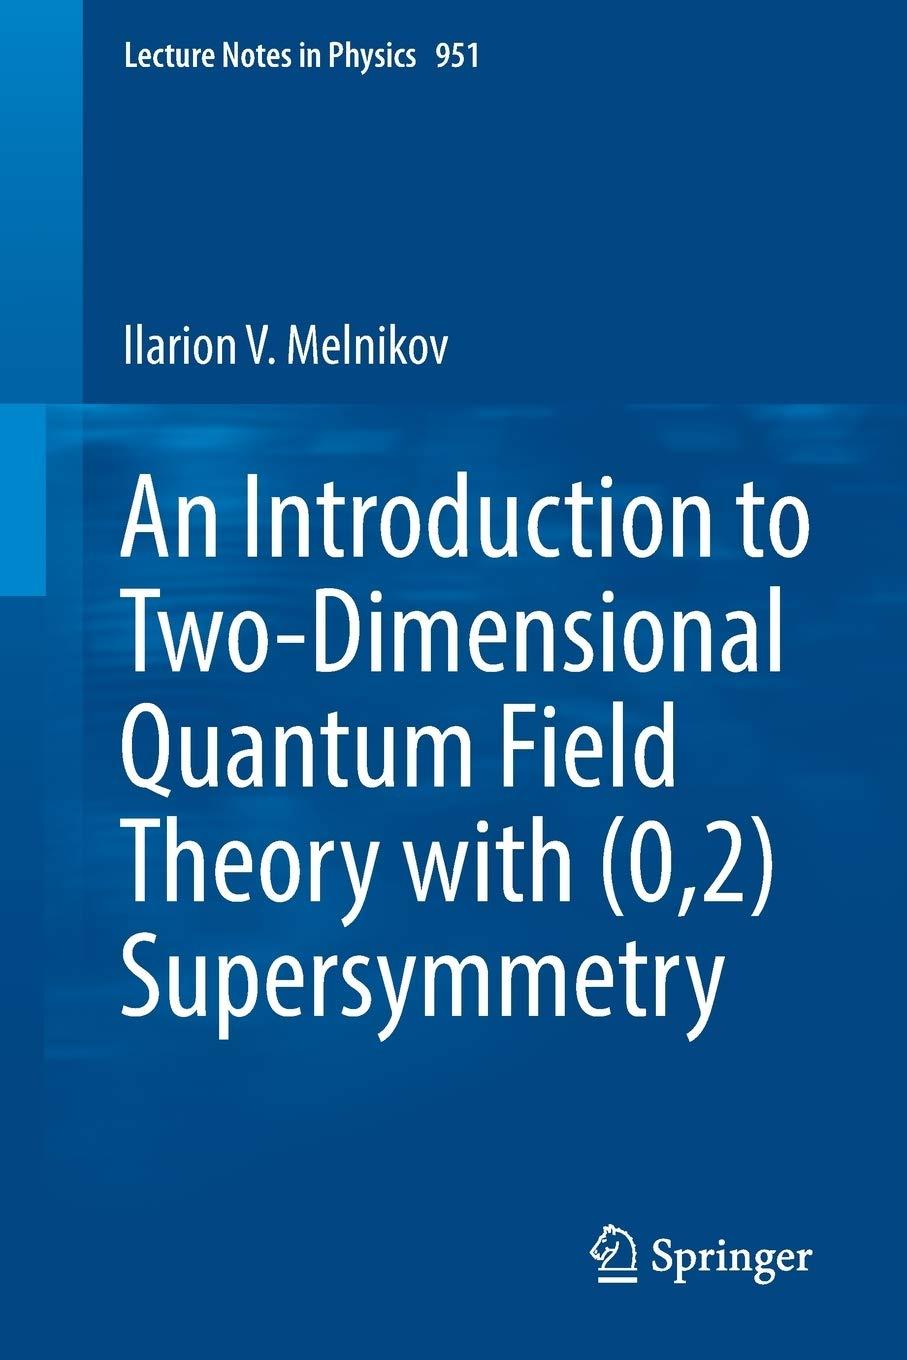 an introduction to two dimensional quantum field theory with 0,2 supersymmetry 1st edition ilarion v.